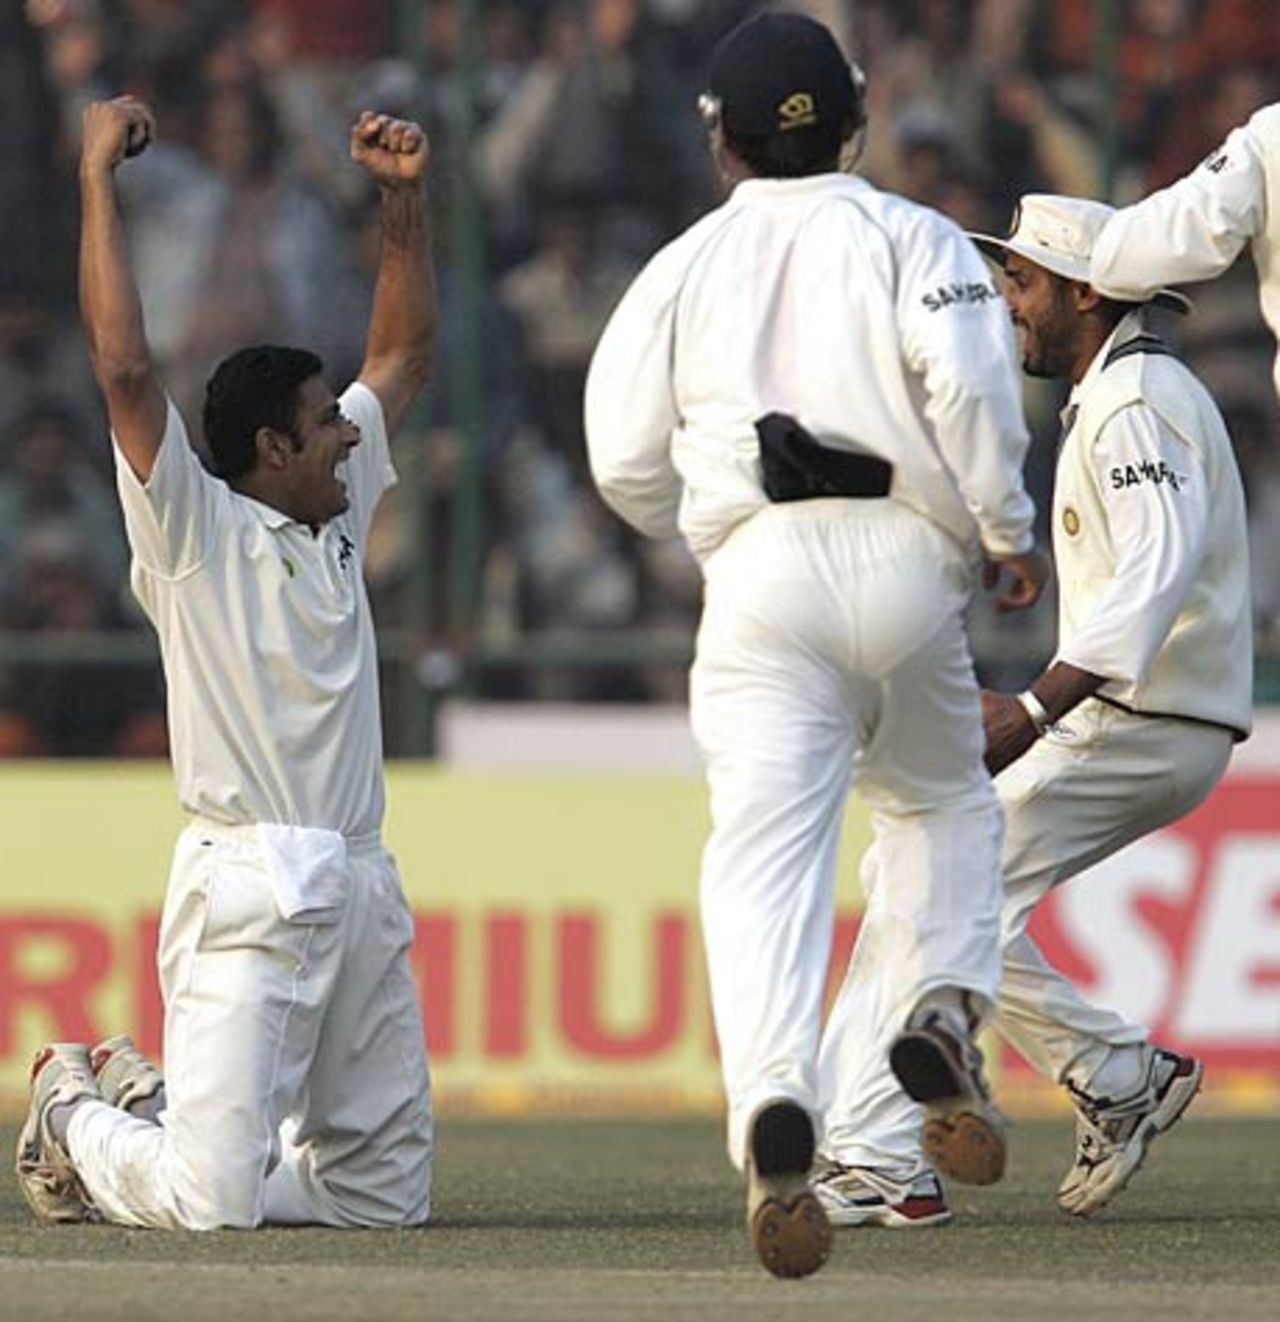 Kumble celebrates after taking an excellent low catch of his own bowling  to dismiss Marvan Atapattu, India v Sri Lanka, 2nd Test, Delhi, December 13, 2005